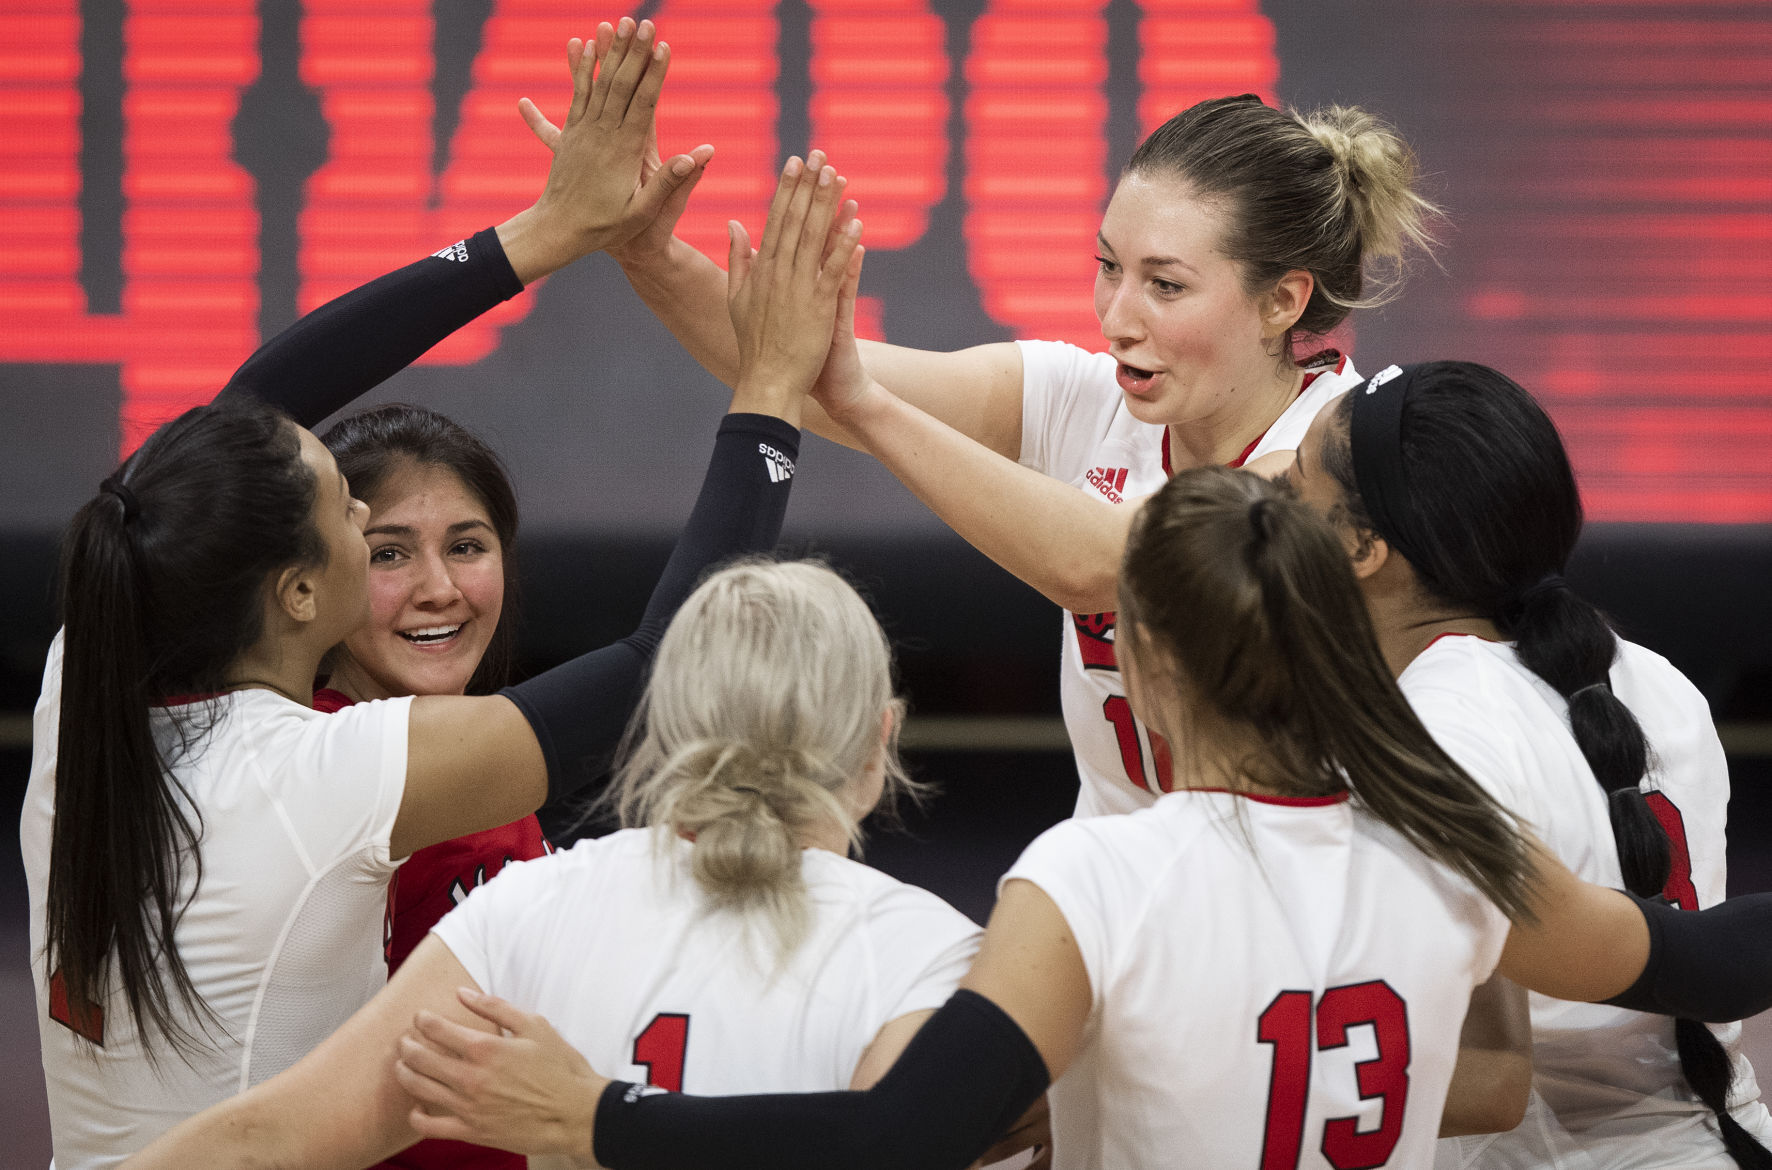 NU volleyball notes What to expect during the first-ever televised Husker spring match